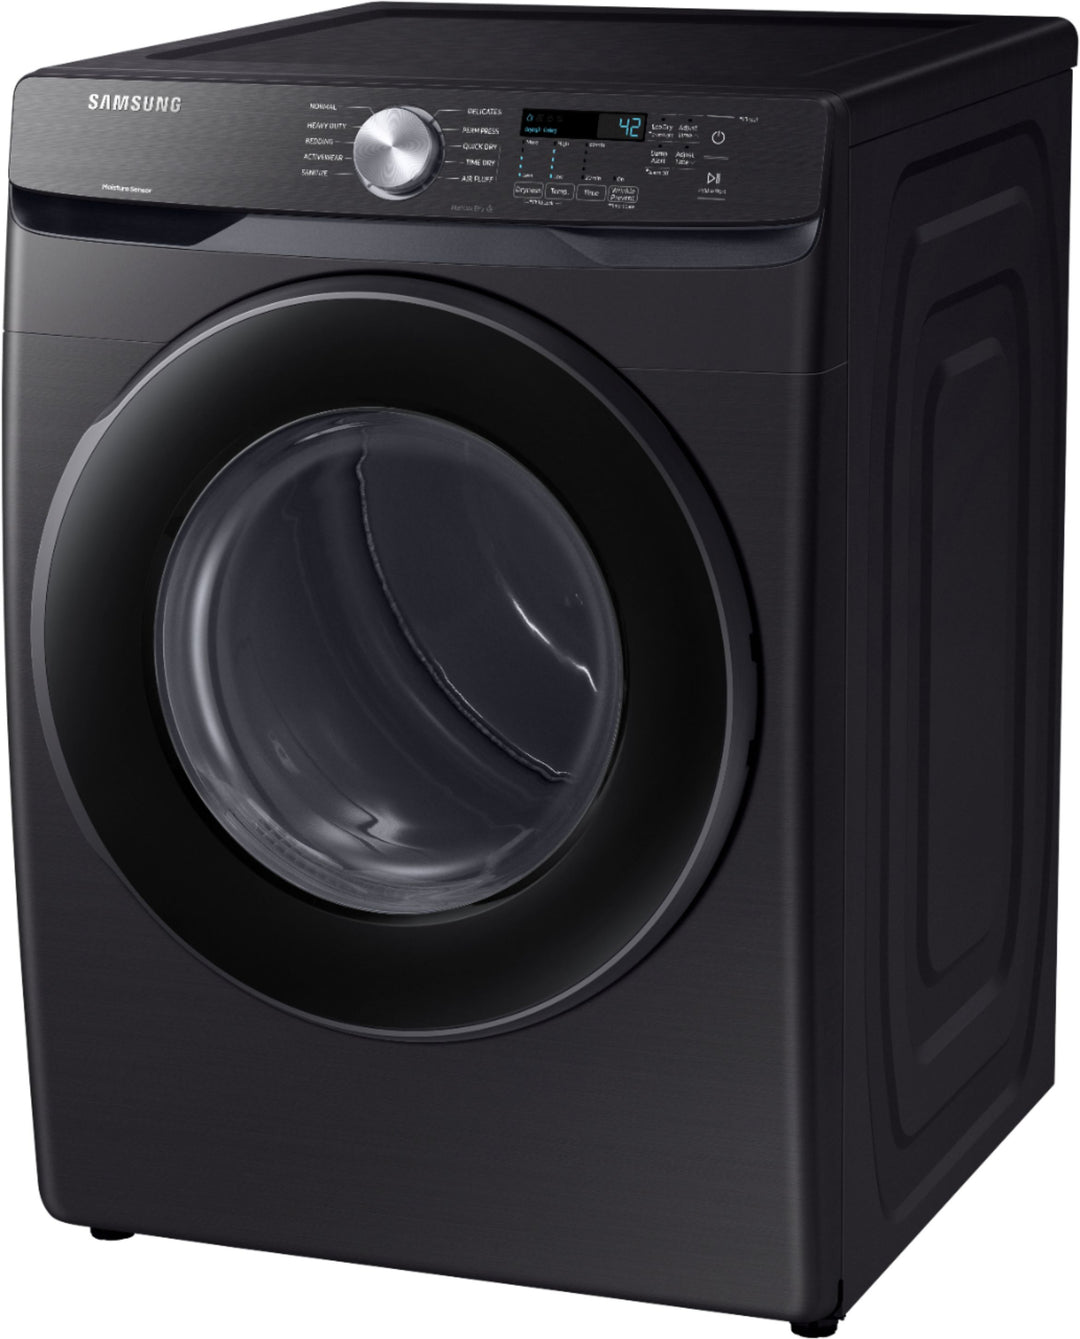 Samsung - 7.5 Cu. Ft. Stackable Gas Dryer with Sensor Dry - Black stainless steel_3